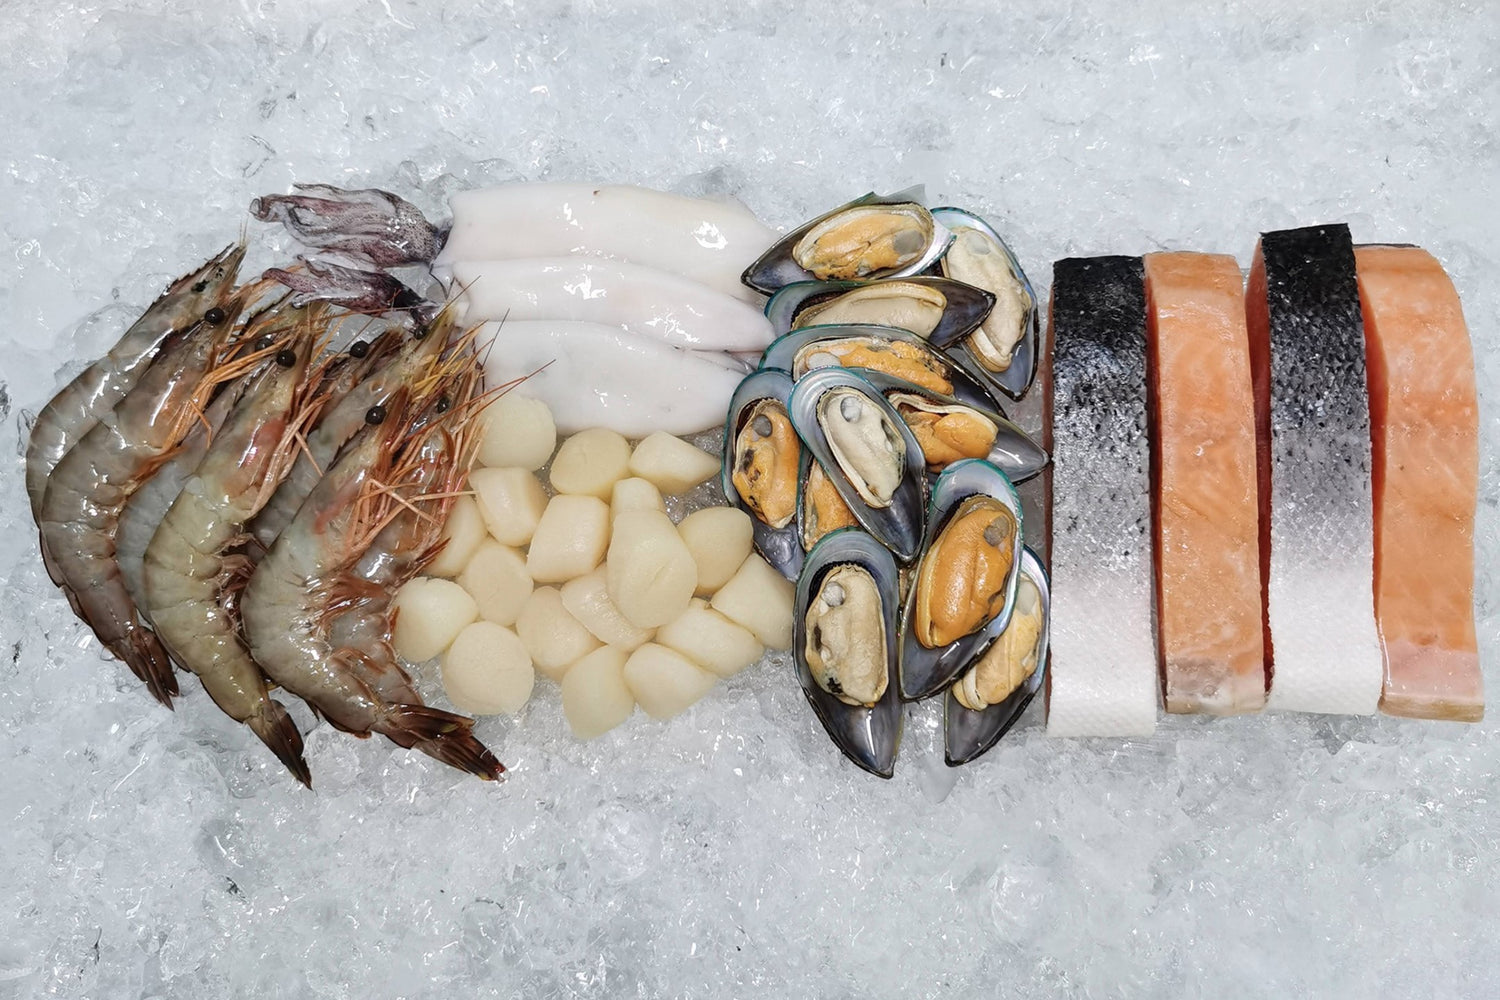 Online Fresh Seafood Delivery Singapore. Frozen Seafood Supplier. Fresh Fish Crab Prawn Delivery